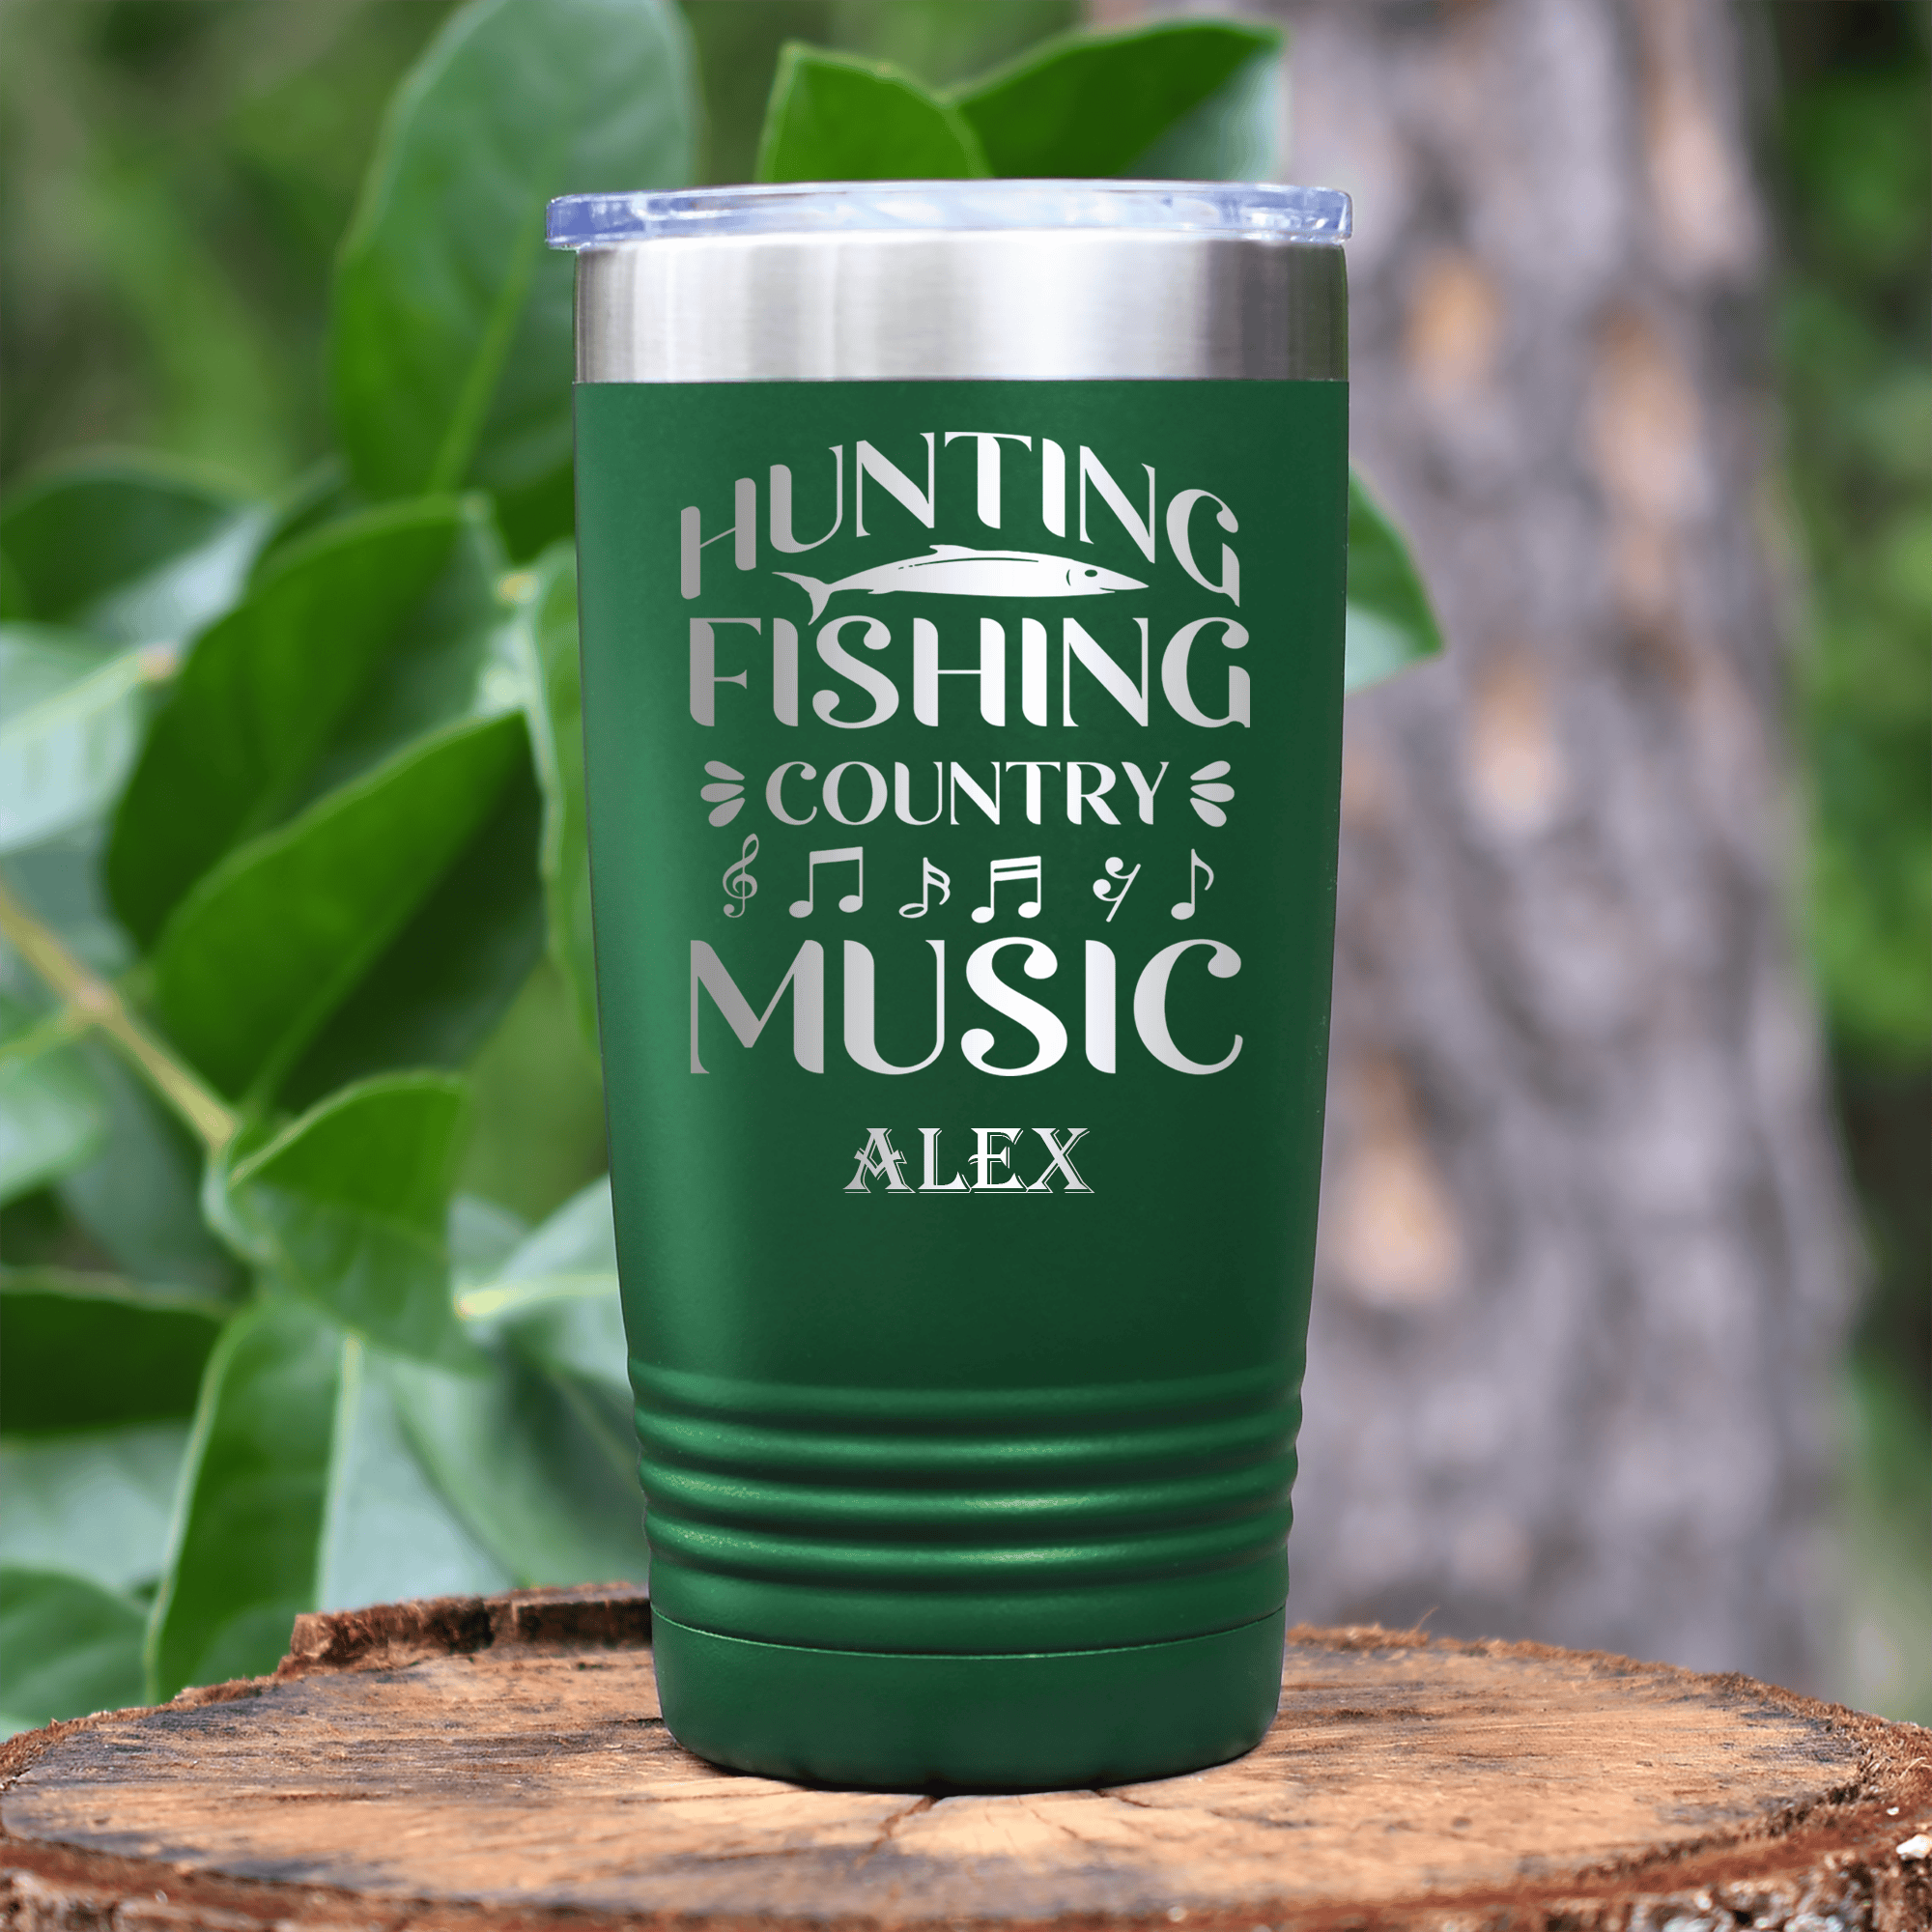 Hunting Fishing And Country Music Tumbler